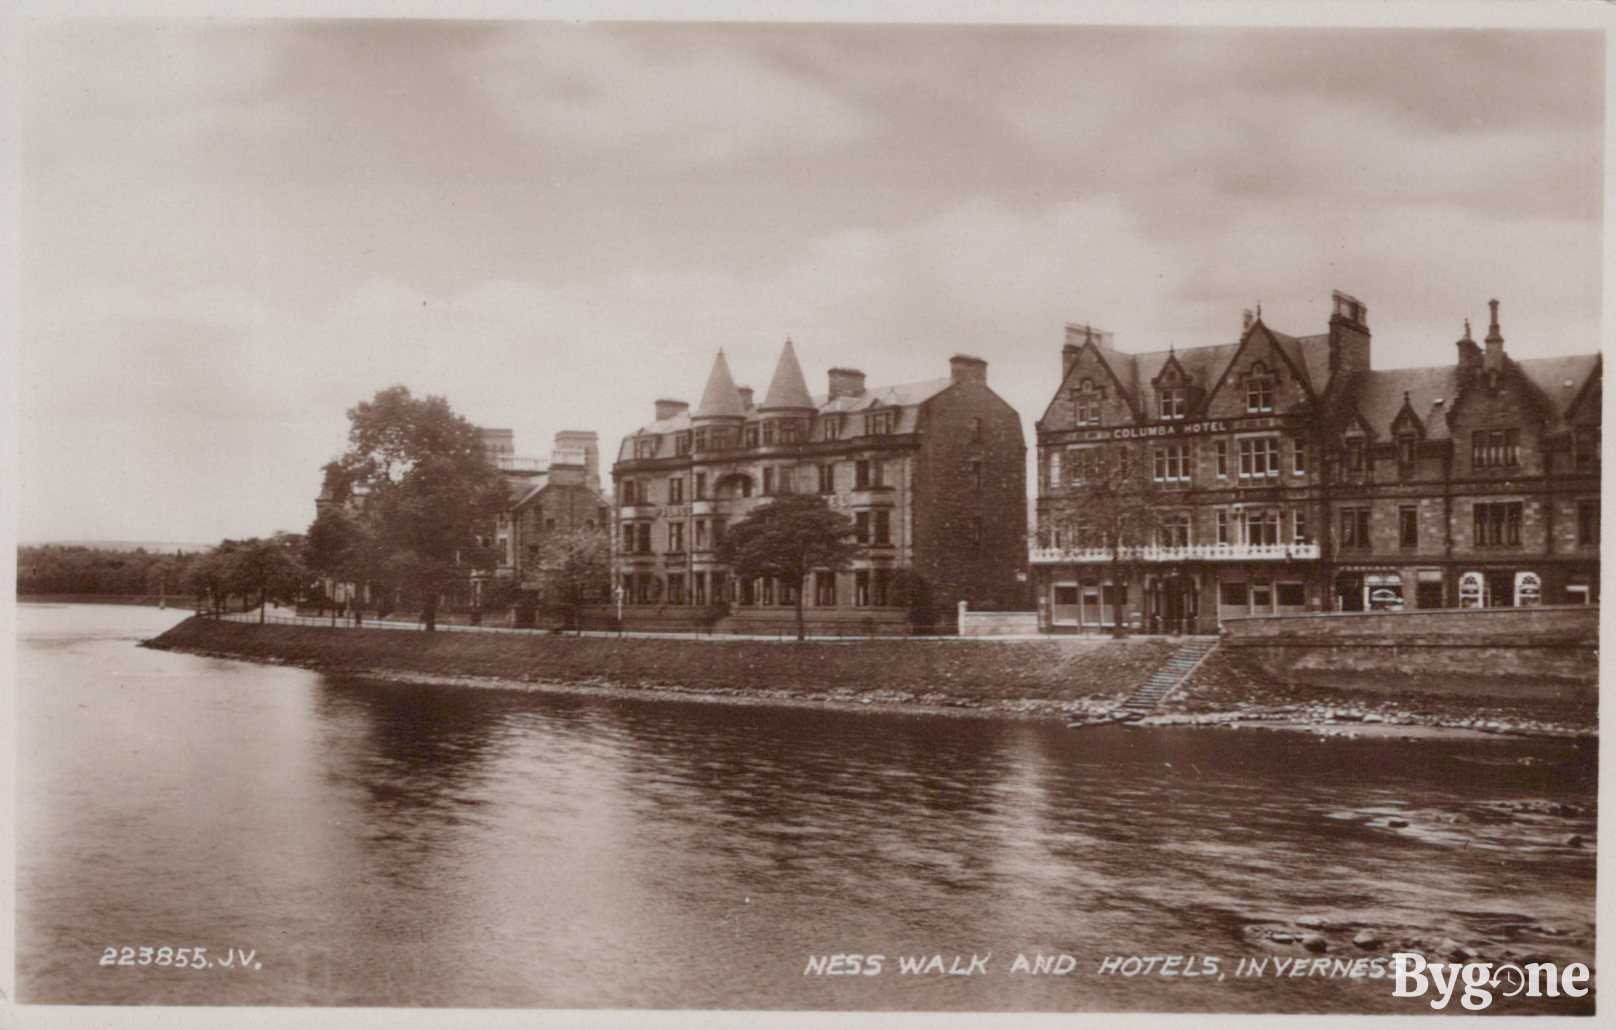 Ness Walk and hotels, Inverness